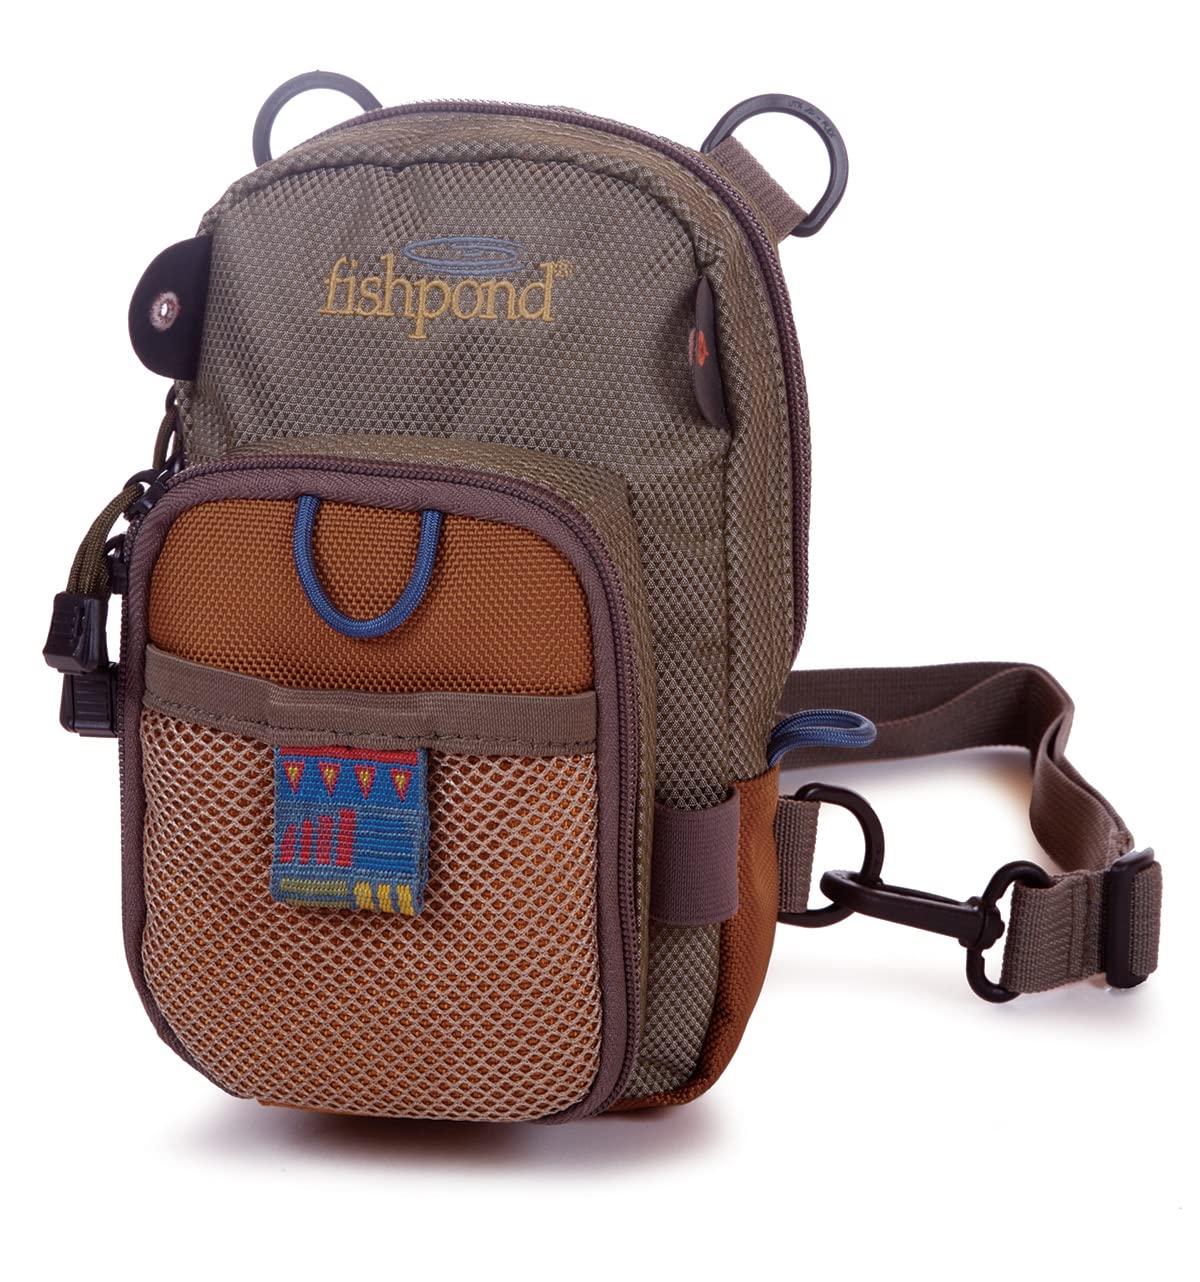 fishpond San Juan Vertical Fly Fishing Chest Pack Bag with Padded Neck  Strap Saddle Brown